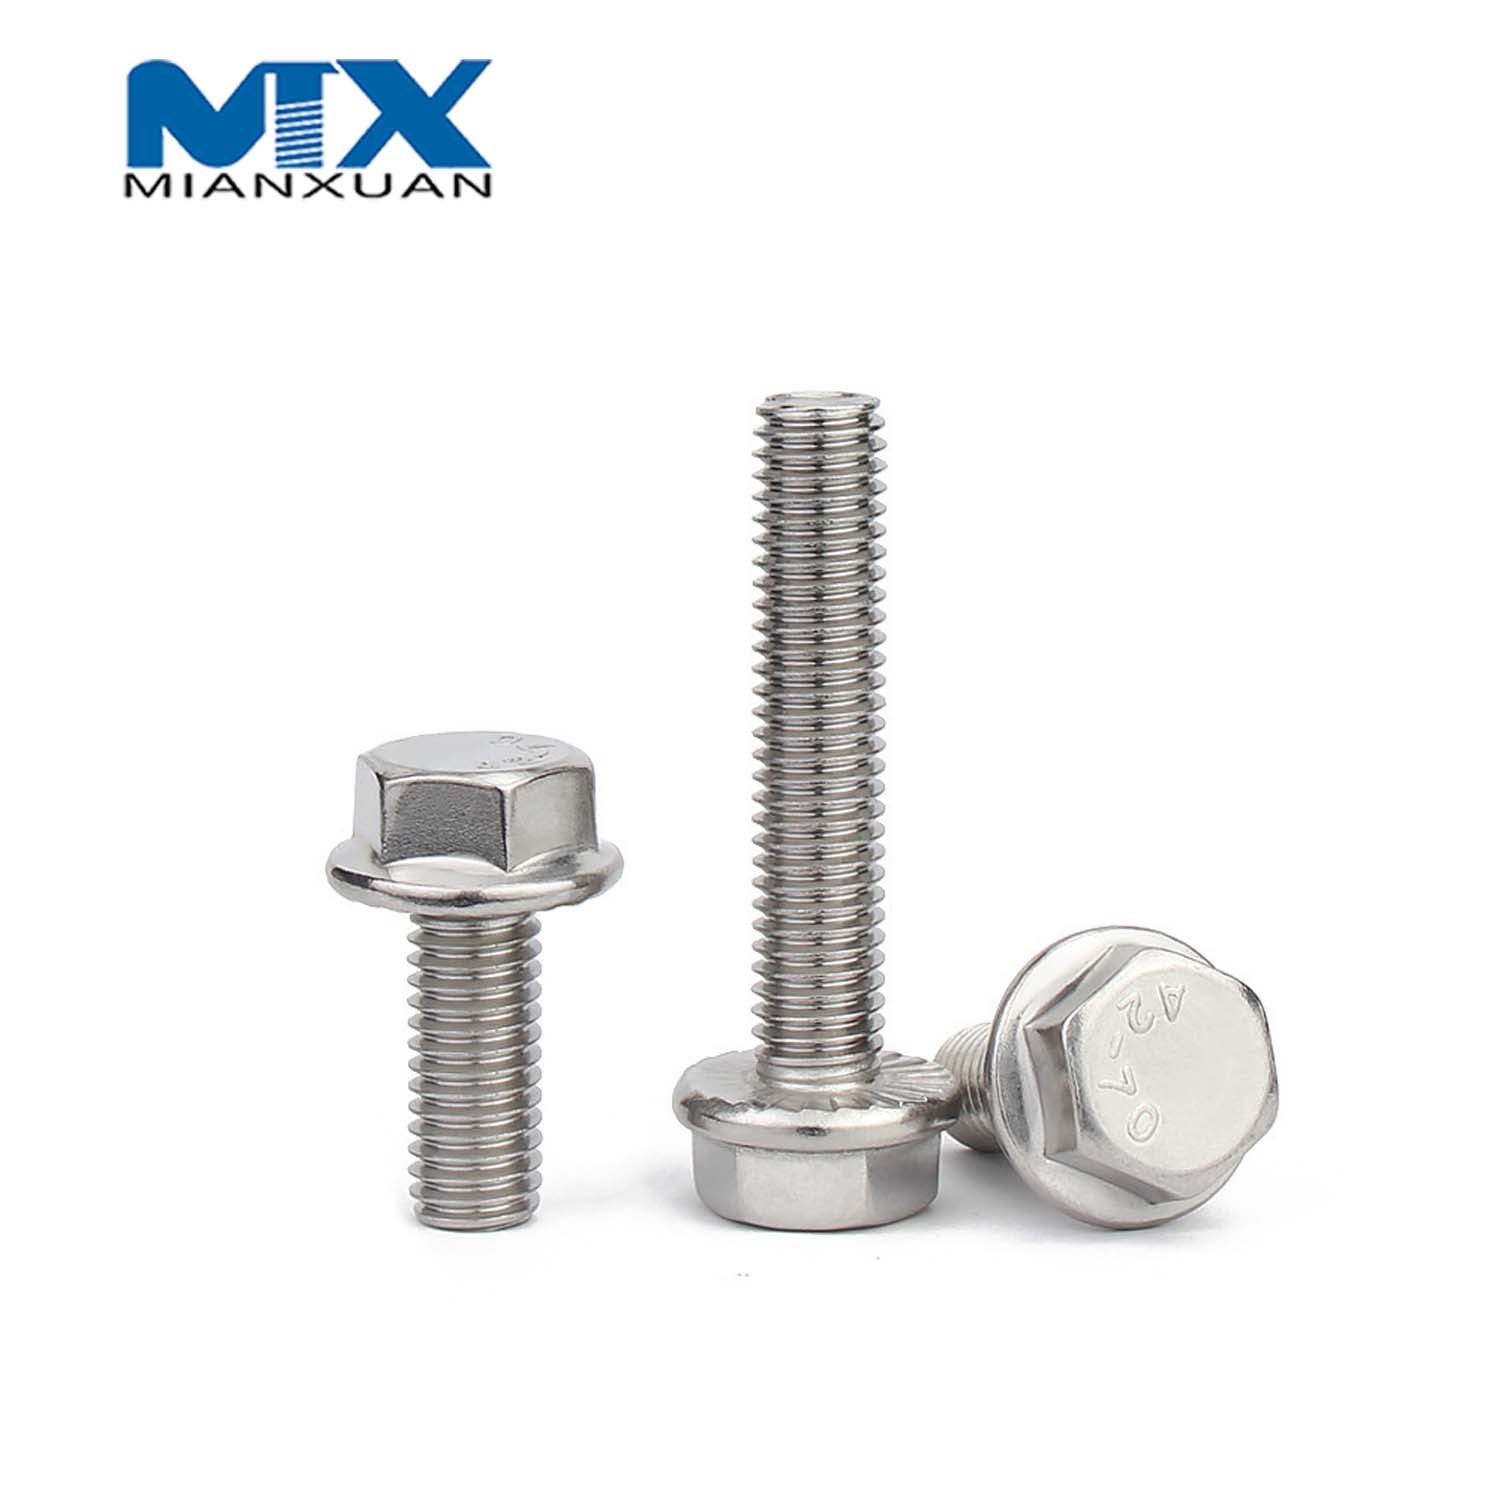 Ifi-111 Hex Head Bolt Stainless Steel with Knurled No-Knurled